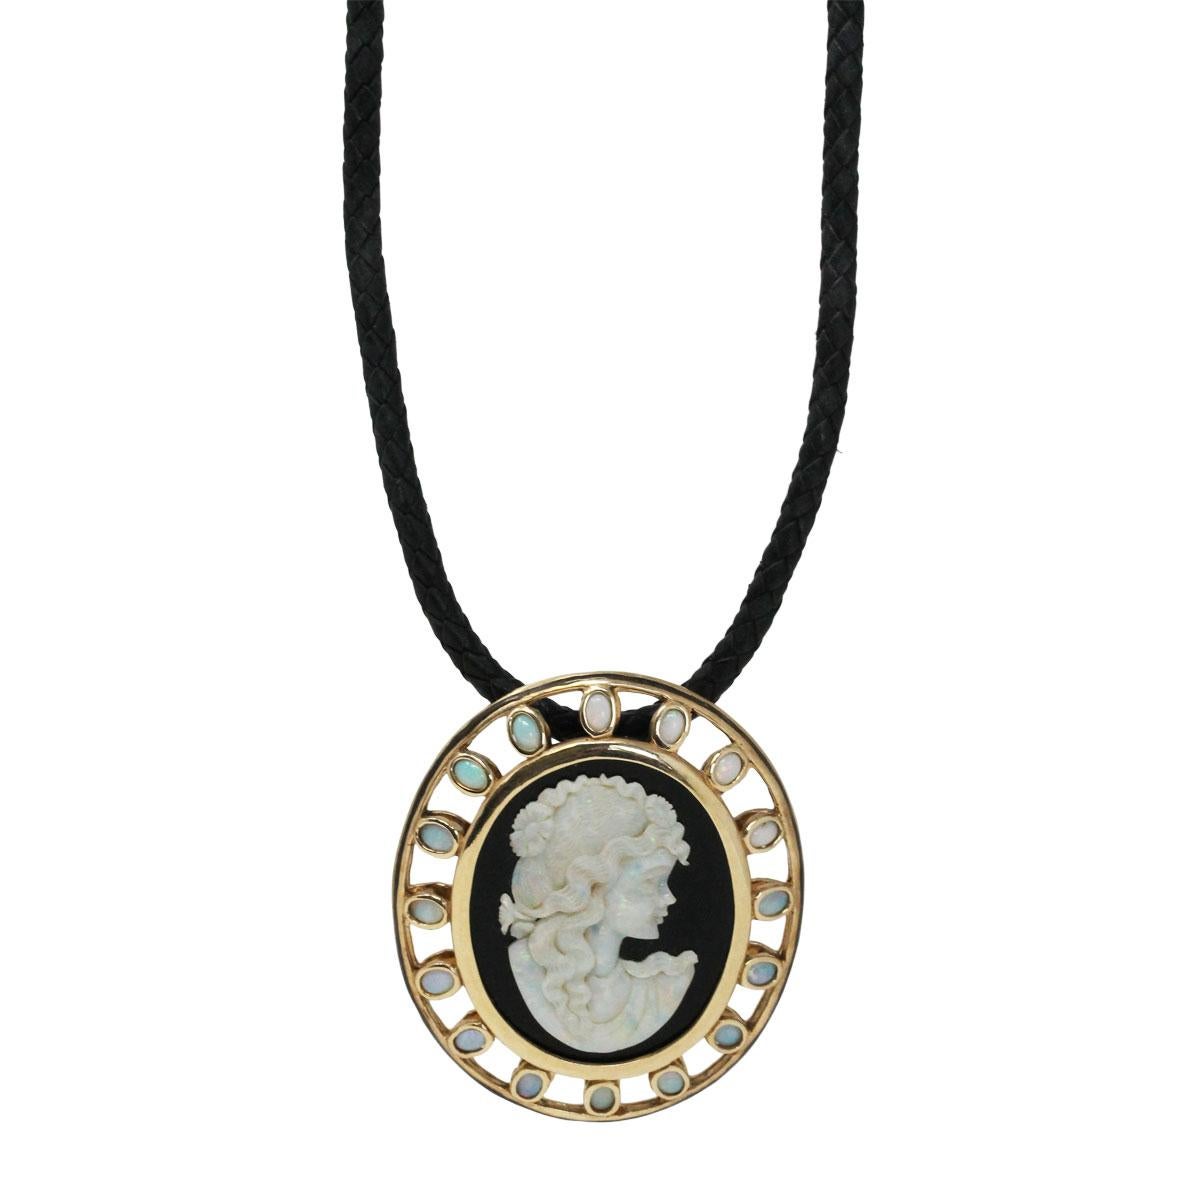 Material: 14k yellow gold
Gemstone Details: Black onyx with opal cameo measuring approximately 1.68″ x 1.18″ and bezel set opals measuring approximately 5.40mm x 3.87″ each.
Necklace Measurements: Leather cord necklace measures 23″ in length
Pendant